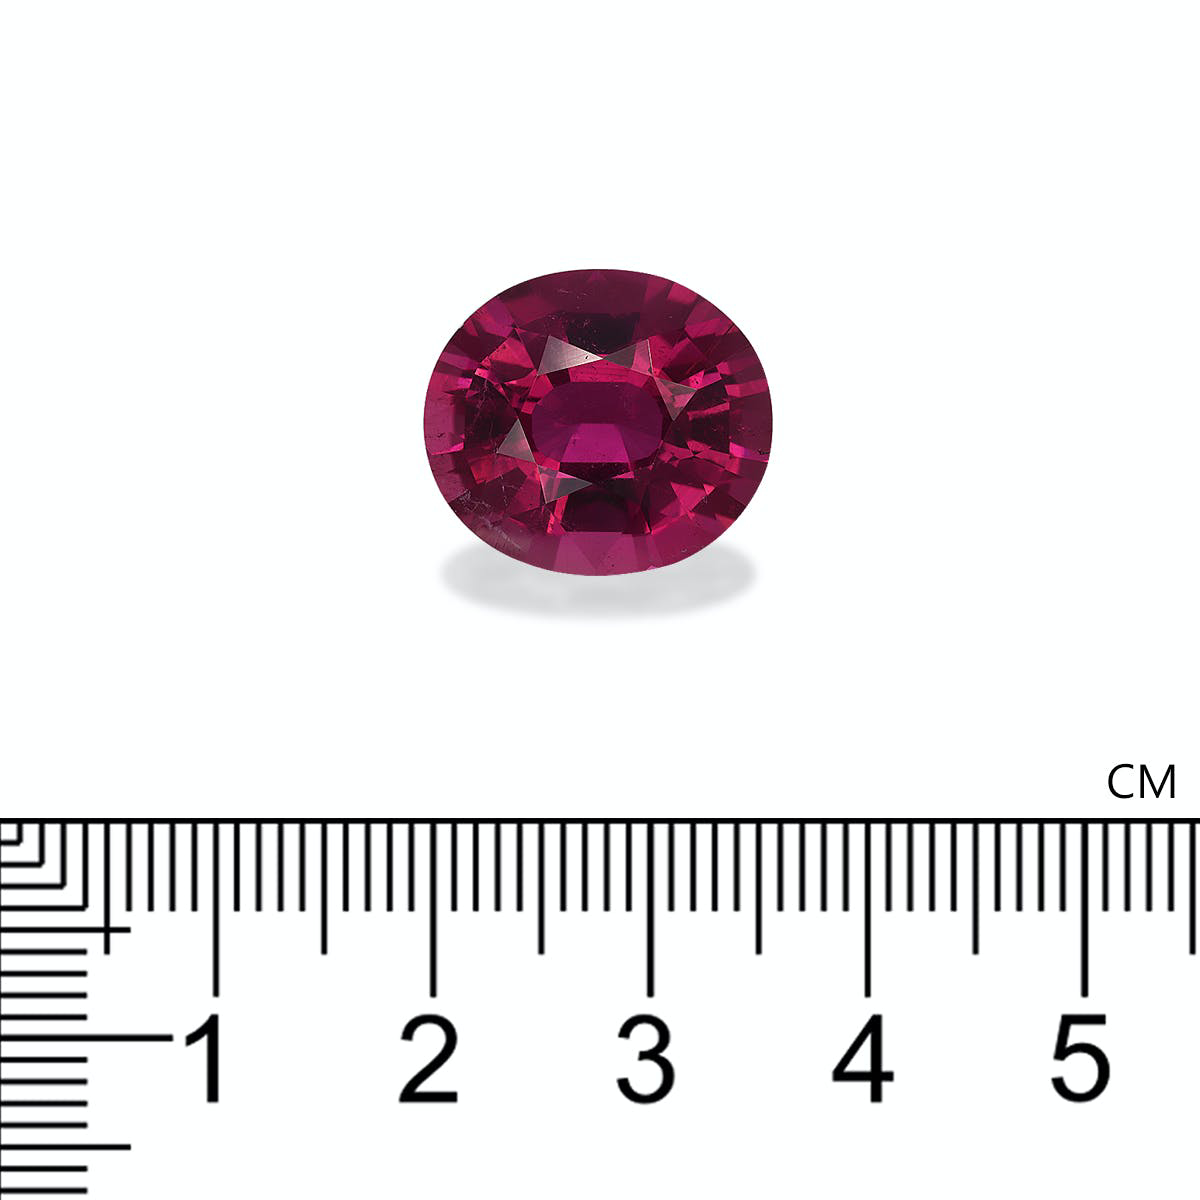 Picture of Vivid Red Rubellite Tourmaline 11.12ct - 16x14mm (RL0664)